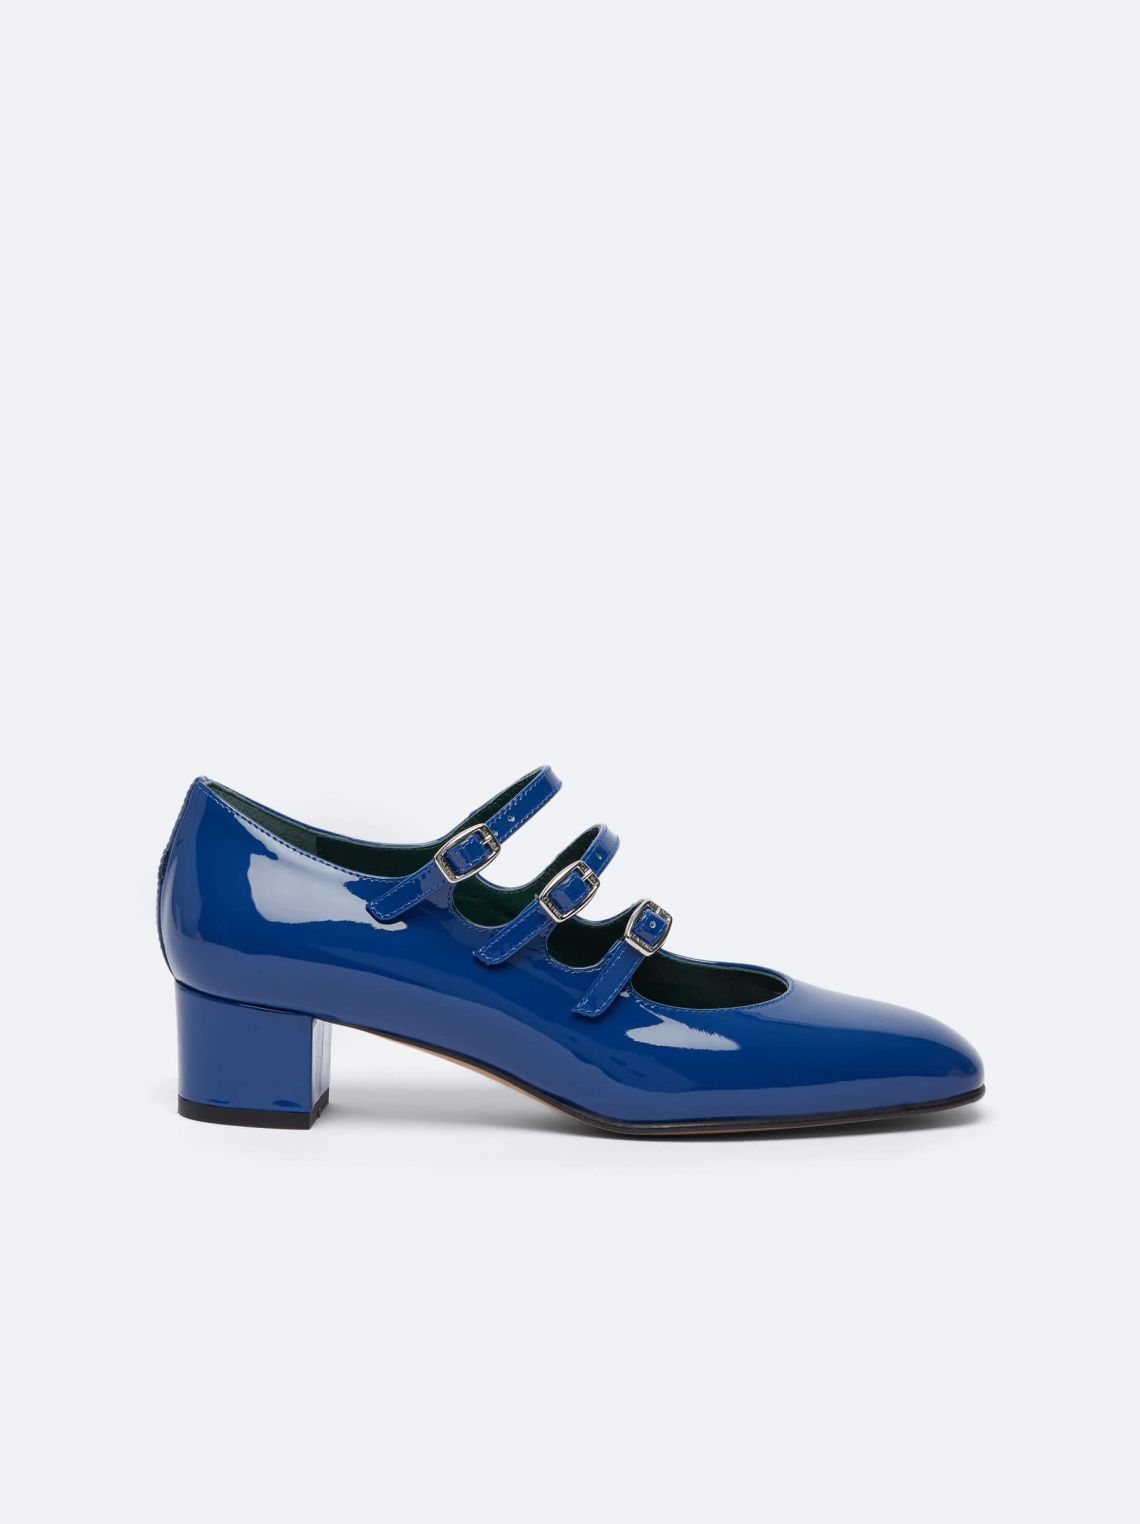 Mary Janes with straps| Carel Paris (3)